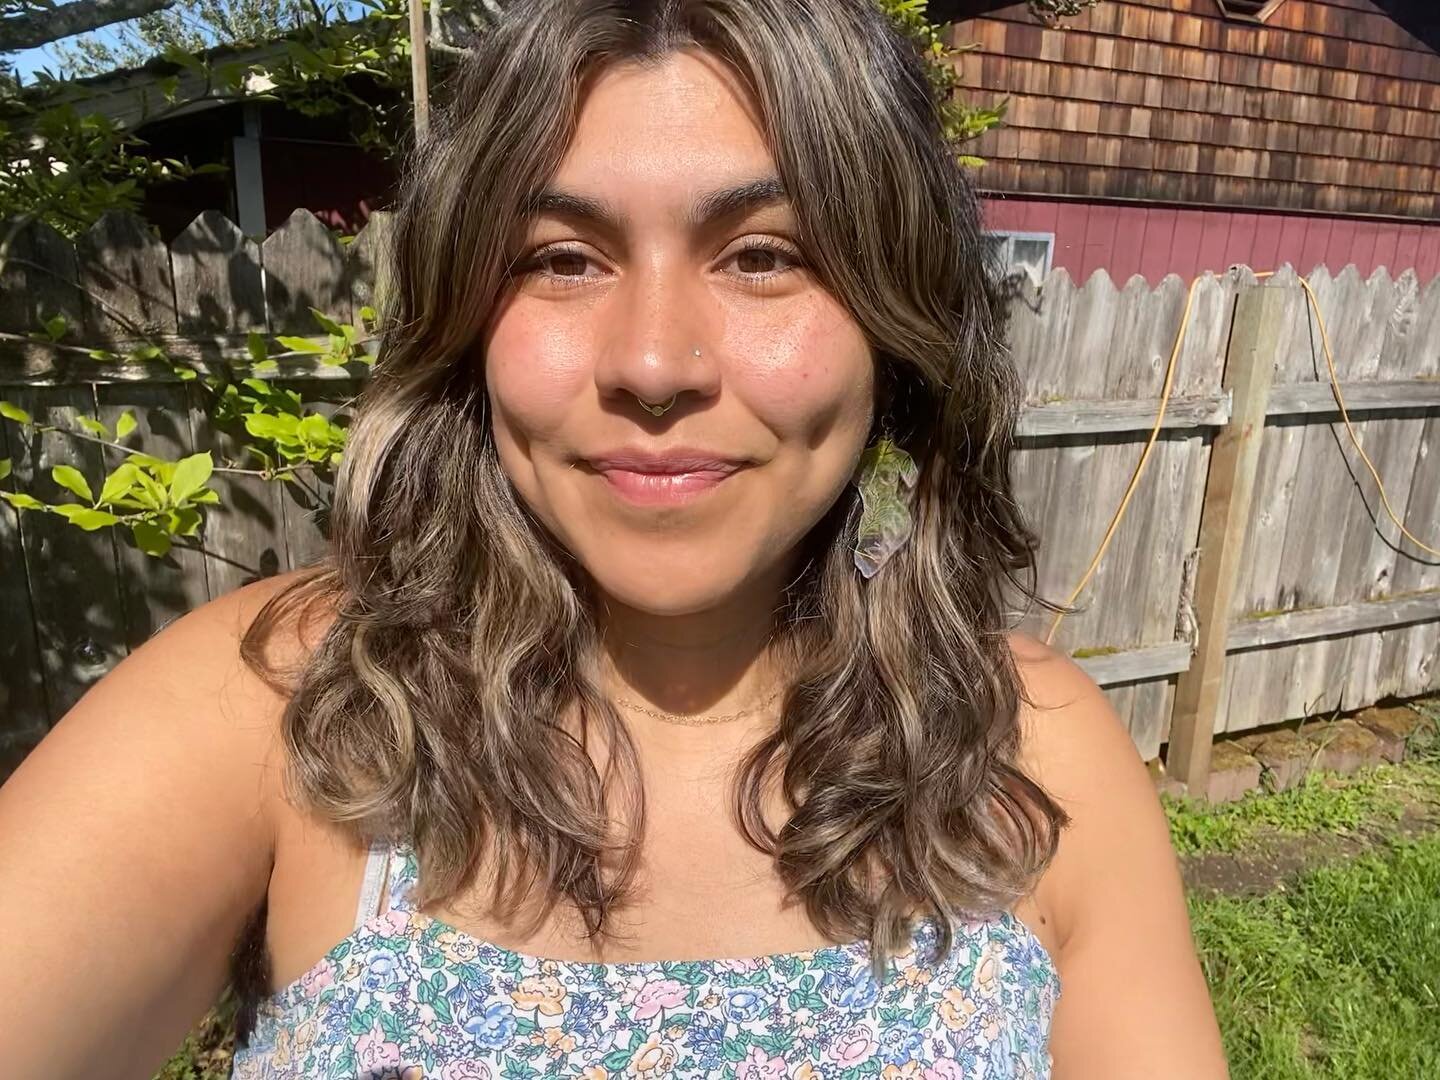 Client selfies bring me so much joy! Big chop on this beauty queen 👸💕✨ send me your sunny selfies this weekend and remember to stay hydrated!!! 😚😚😚

#tacomastylist #tacomasalon #tacomasmallbusiness #curtainbaings #longbob #curlyhair #curlycut